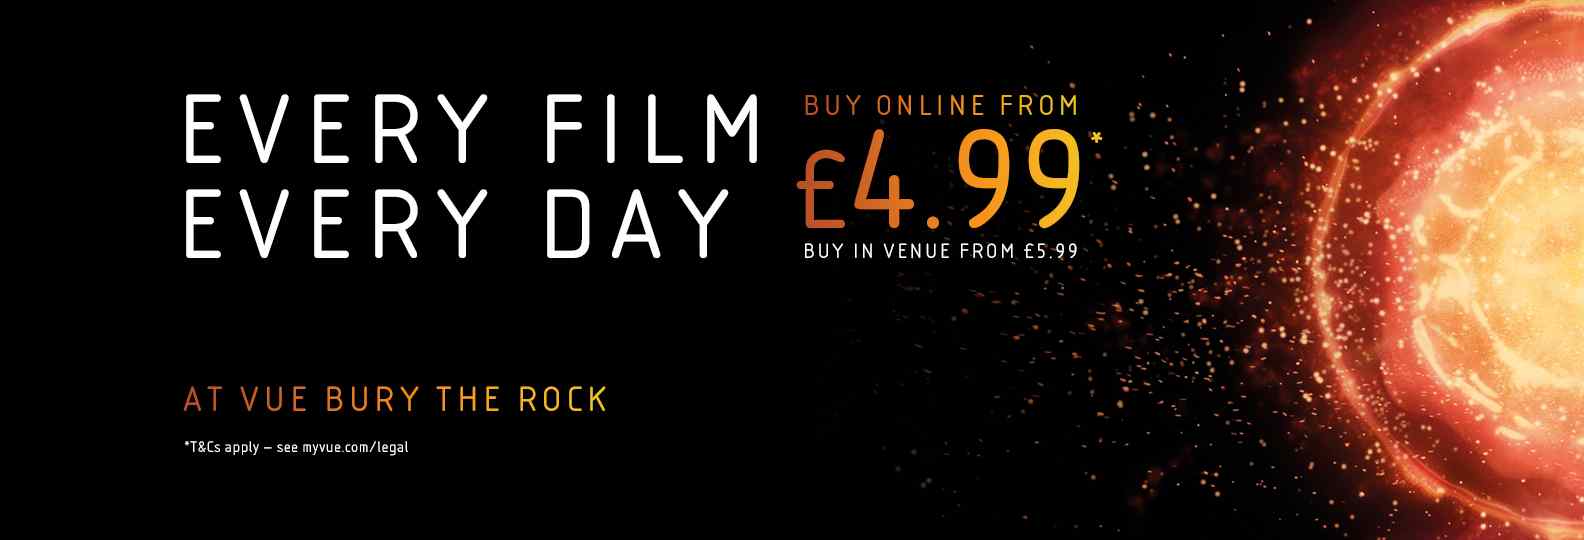 Vue Bury The Rock | Every Film, Every Day from £4.99